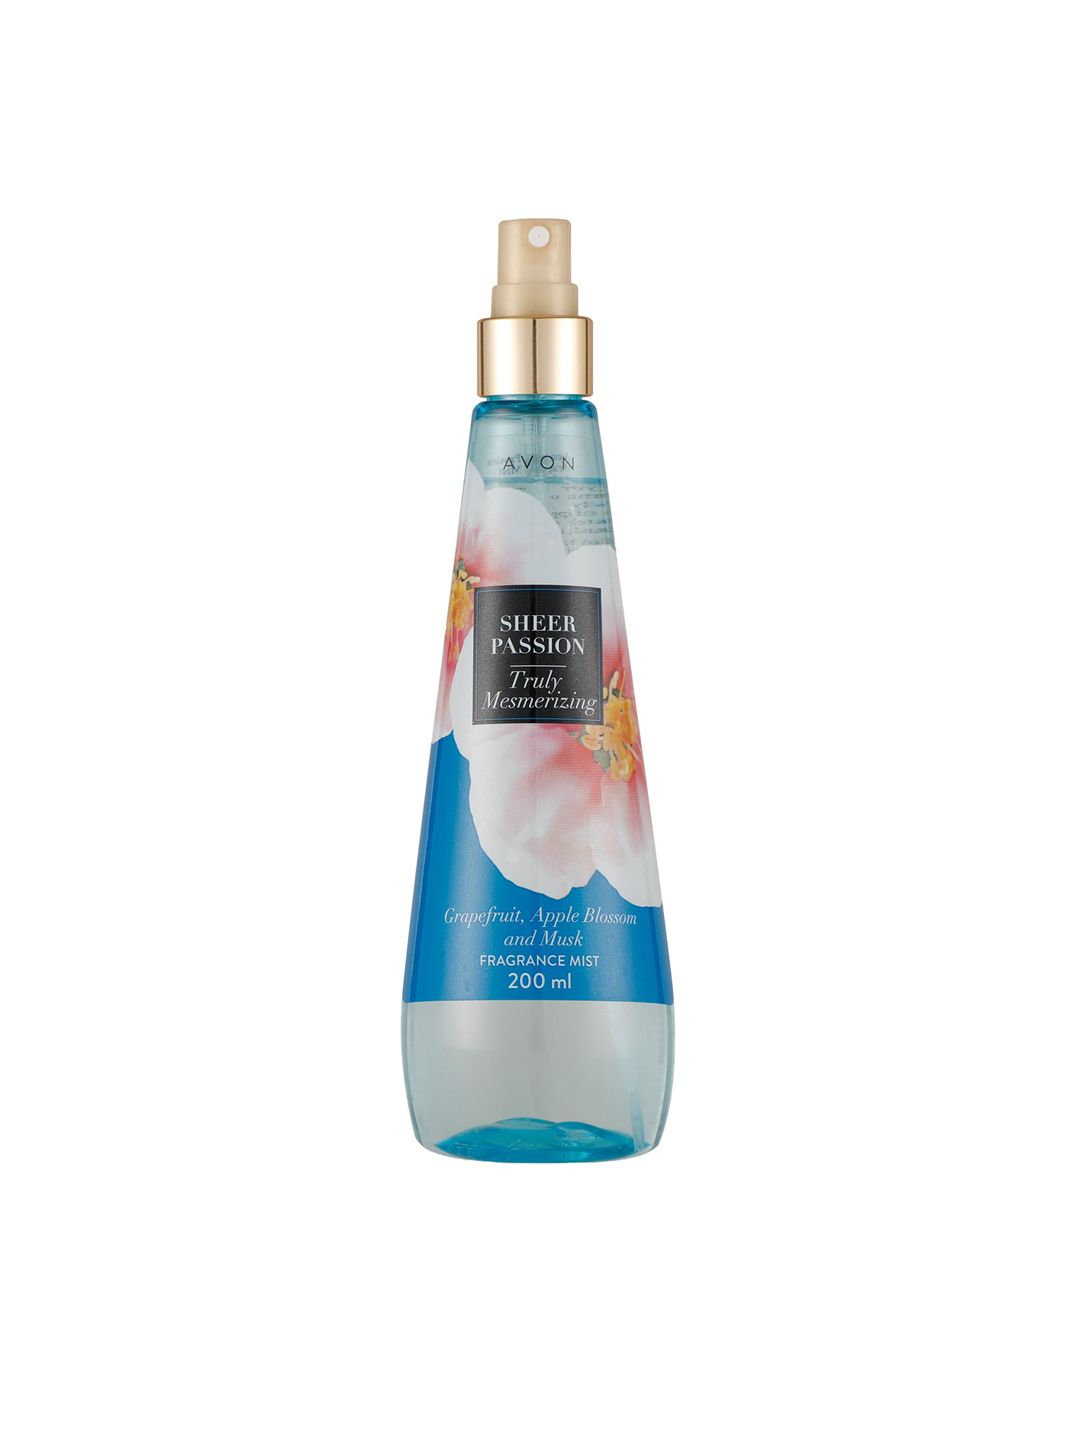 Avon Sheer Passion Truly Mesmerizing Fragrance Body Mist 200ml Price in India